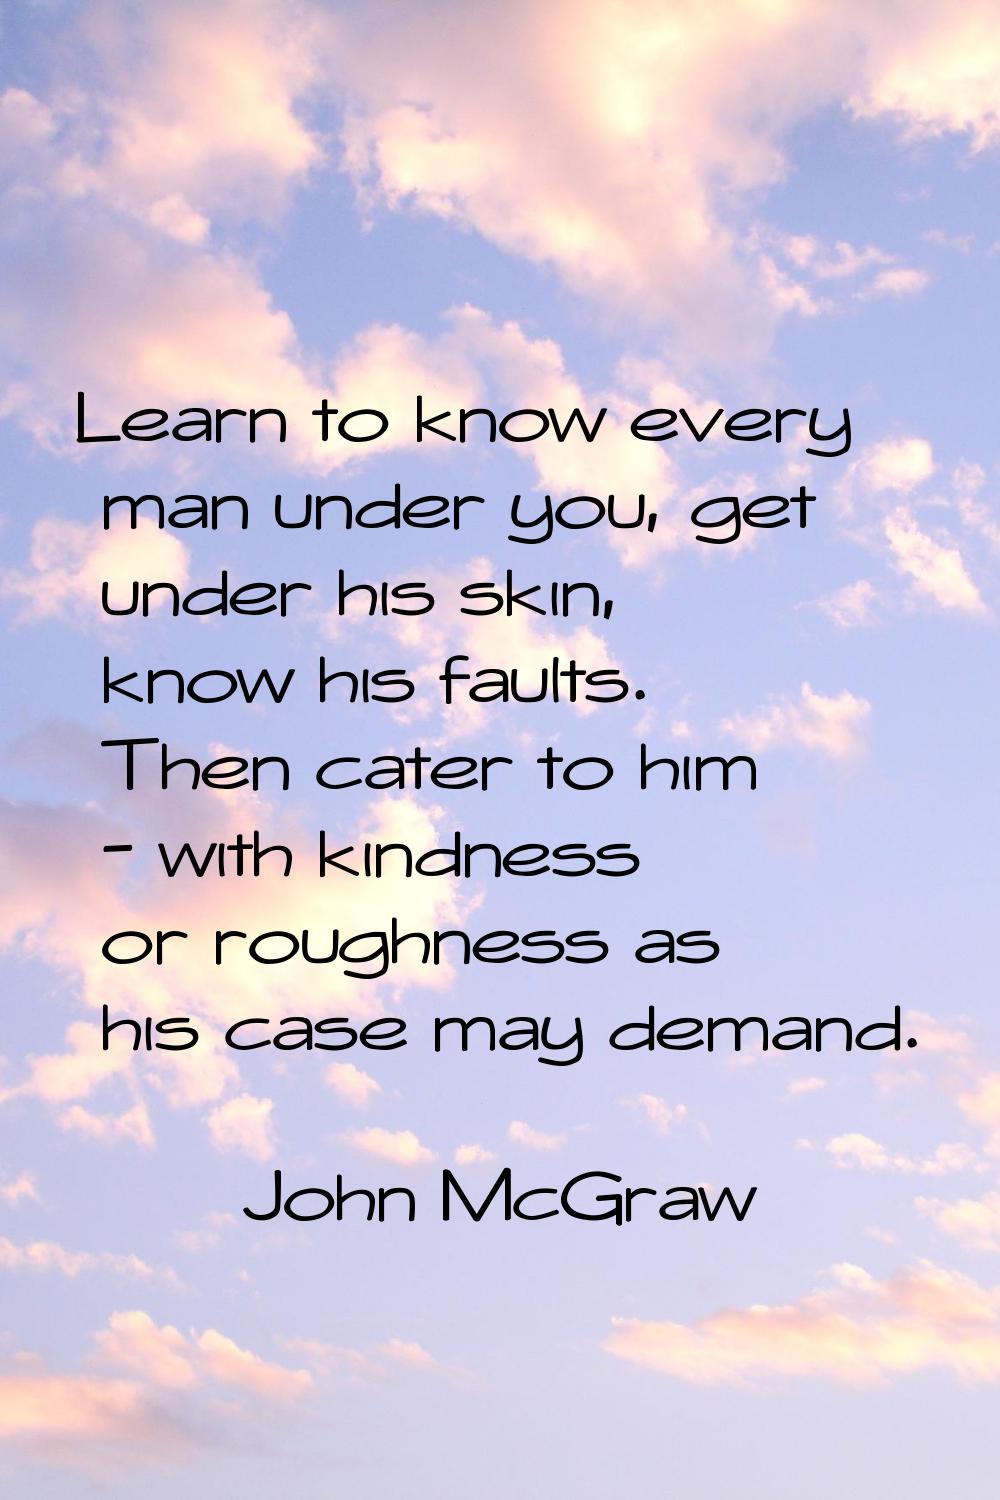 Learn to know every man under you, get under his skin, know his faults. Then cater to him - with ki